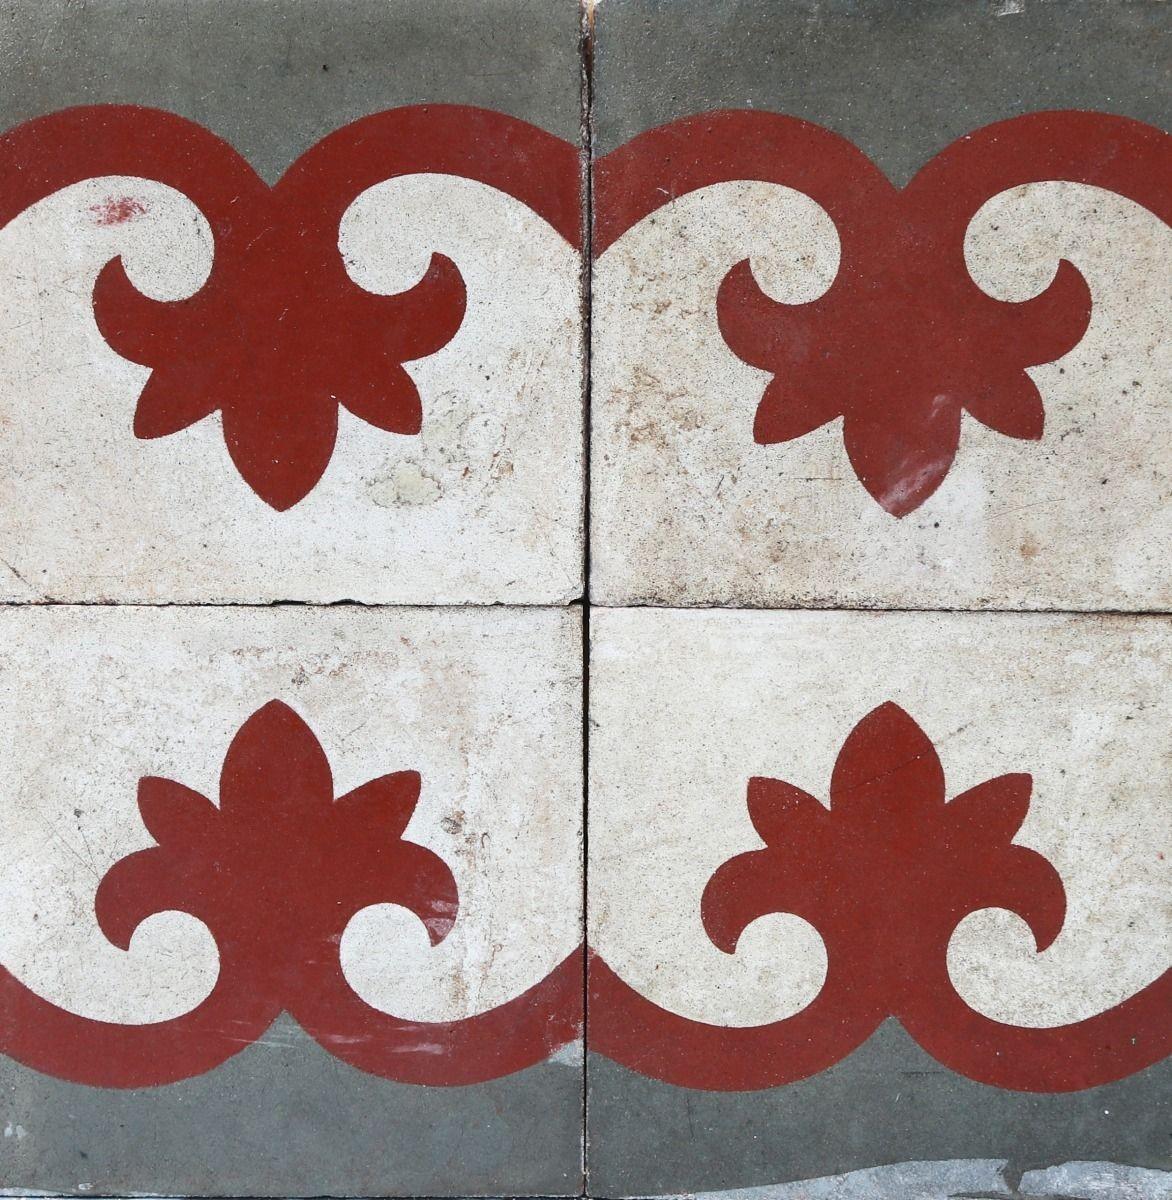 A batch of 28 reclaimed encaustic cement floor tiles. These tiles will cover 1.12 m2 or 12 sq. ft. They are suitable for use on floors or walls.